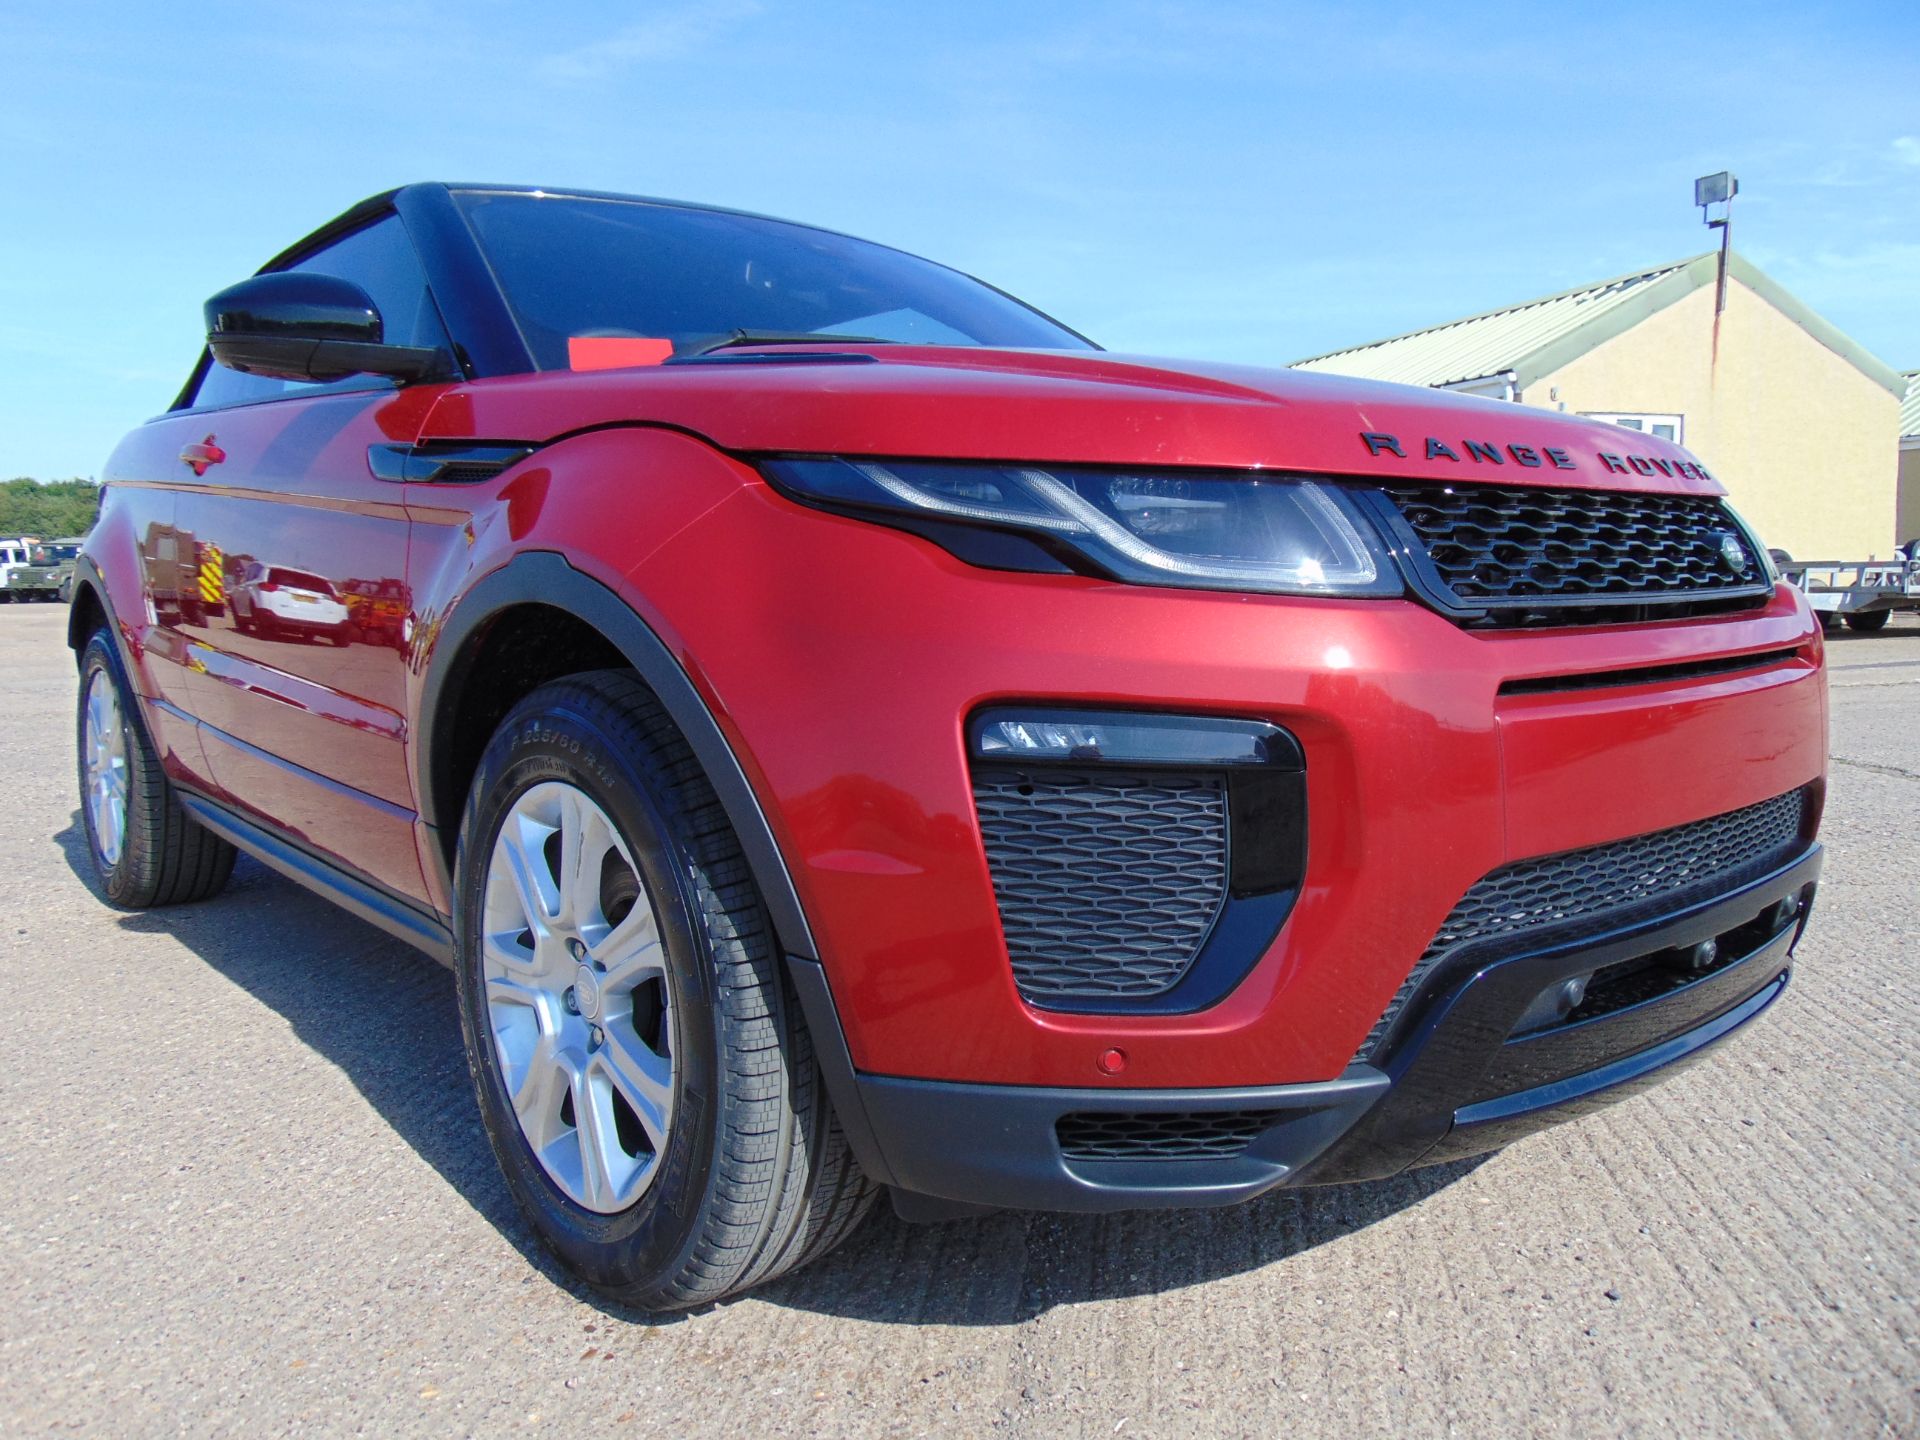 NEW UNUSED Range Rover Evoque 2.0 i4 HSE Dynamic Convertible - Image 7 of 39